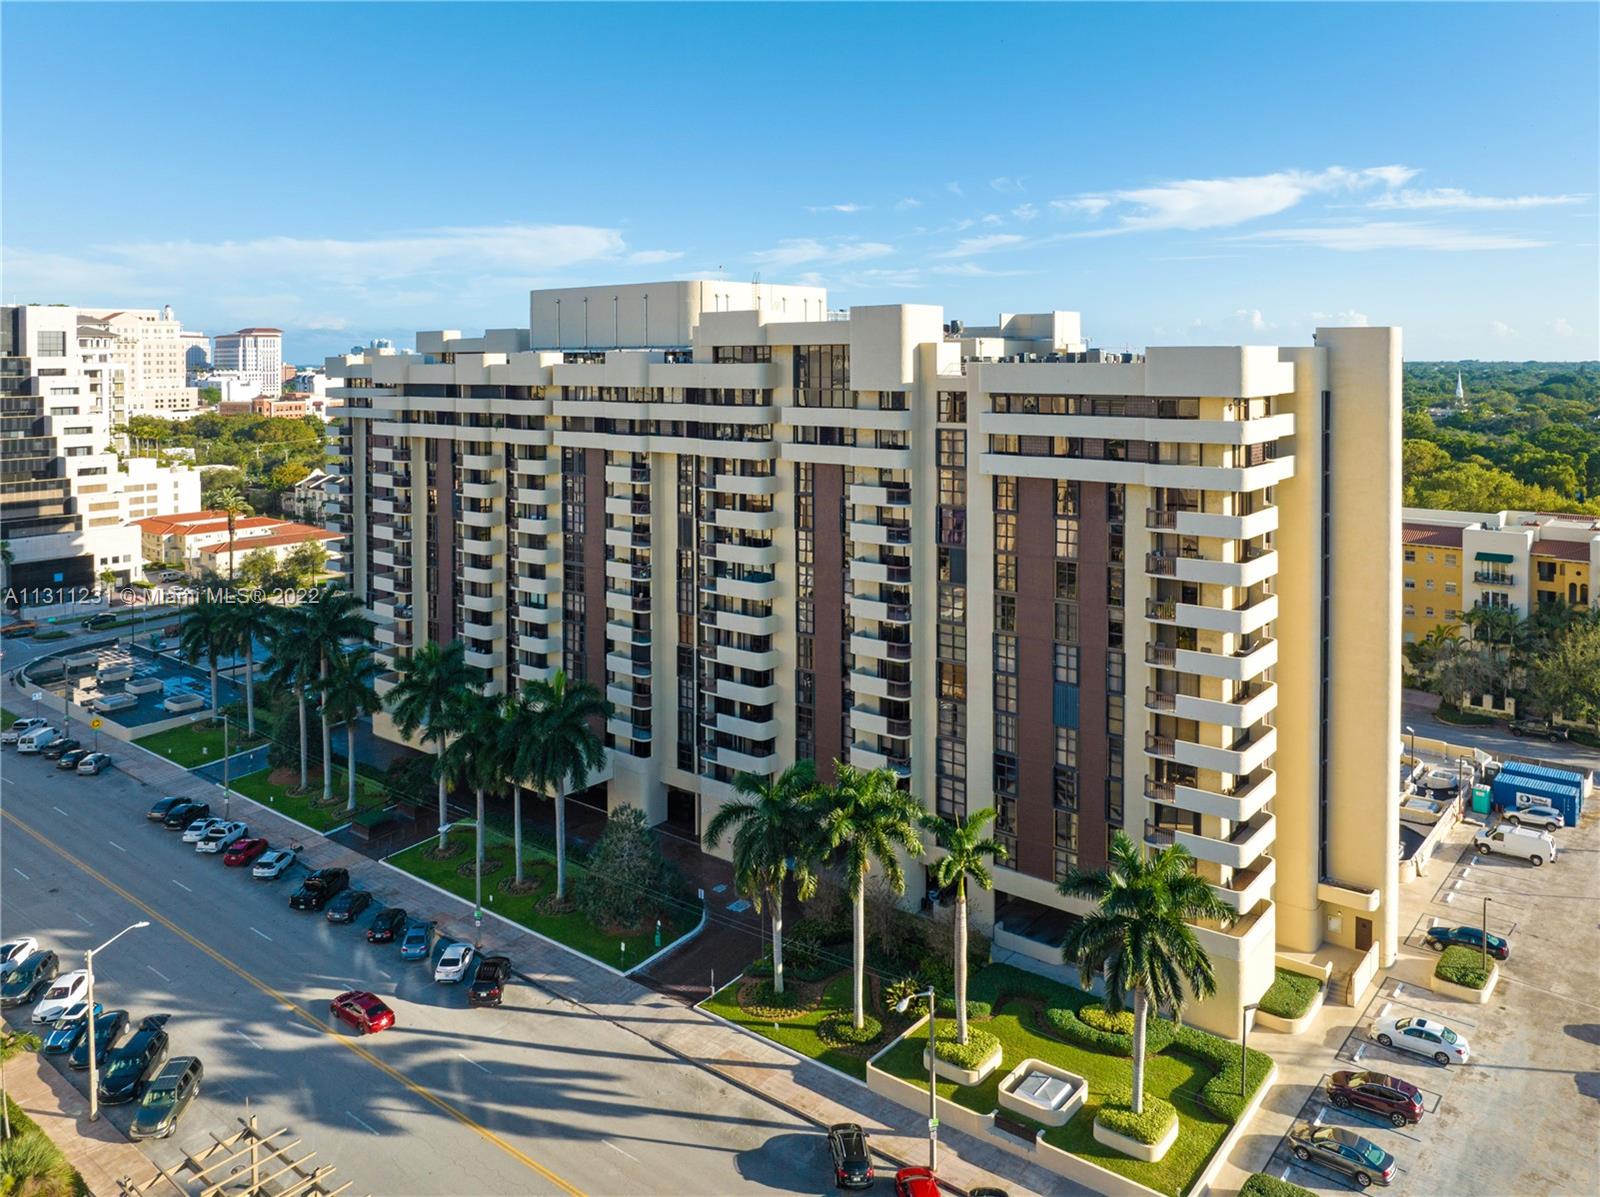 Enjoy living in the heart of Coral Gables walking distance to Miracle Mile with restaurants, shops and the Granada Golf Course. This spacious corner unit at the Biltmore II has 2 bedroom 2.5 baths and boasts 1,482 SF. This unit has marble floors and crown moldings throughout. The wrap around balcony offers views of downtown Coral Gables. The recently remodeled kitchen has wood cabinet, stainless steel appliances and granite countertops. The master bedroom has ample space complete with a large walk-in closet. The Biltmore II is meticulously cared for. Entering the building you are greeted by the expansive lobby with a beautiful glass atrium. Amenities including 24-hour concierge, olympic size lap pool, fitness center, sauna, billiard room, a social room and more.